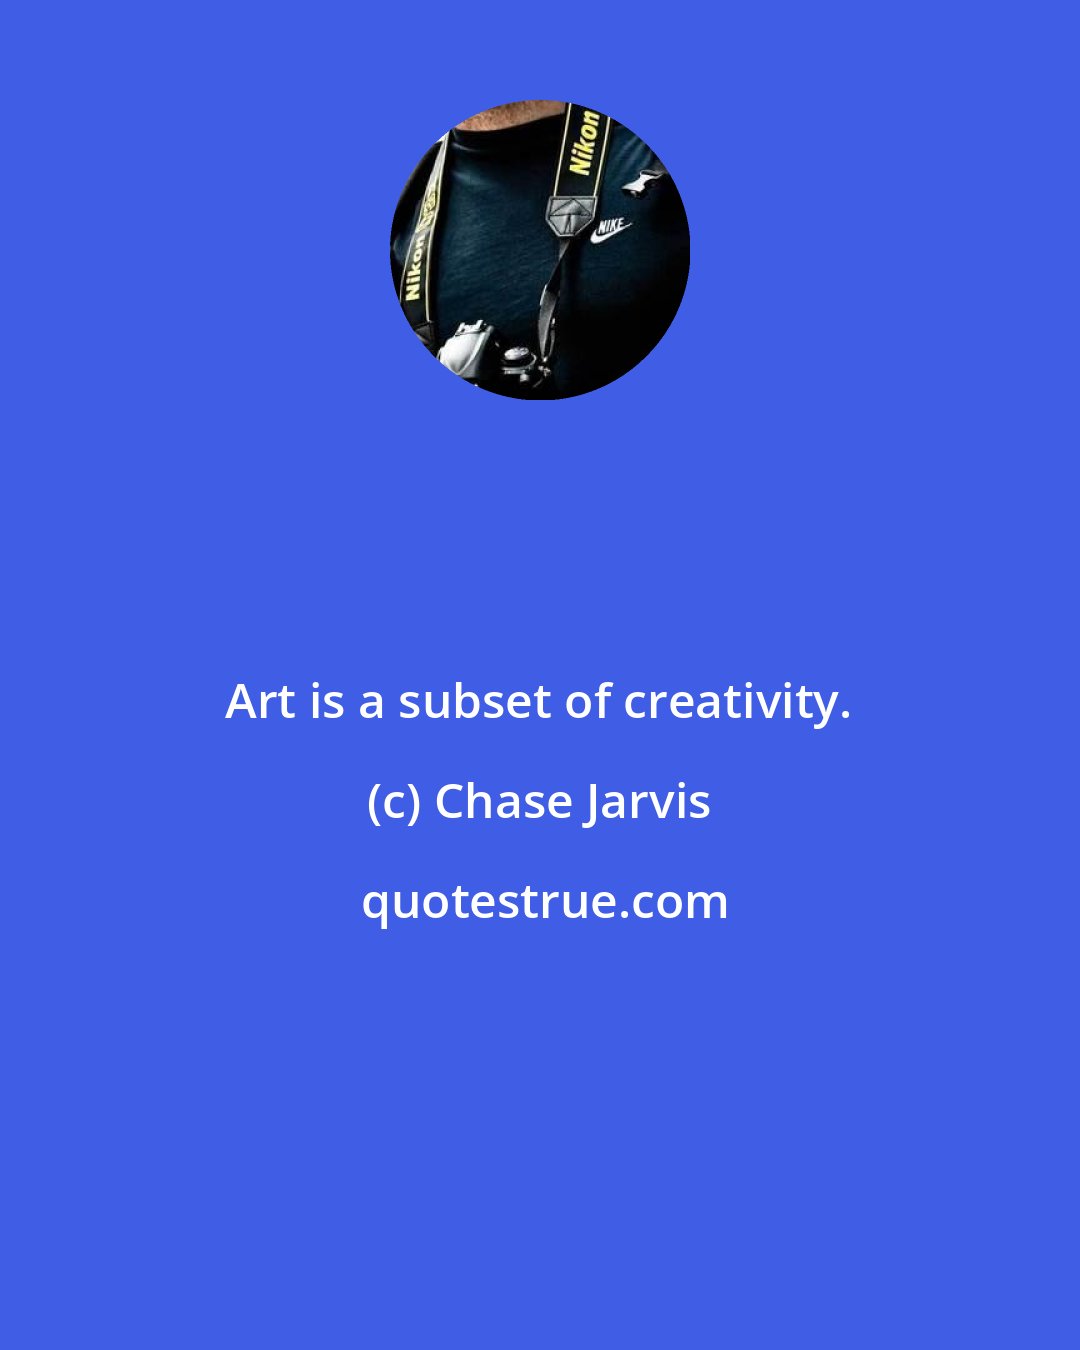 Chase Jarvis: Art is a subset of creativity.